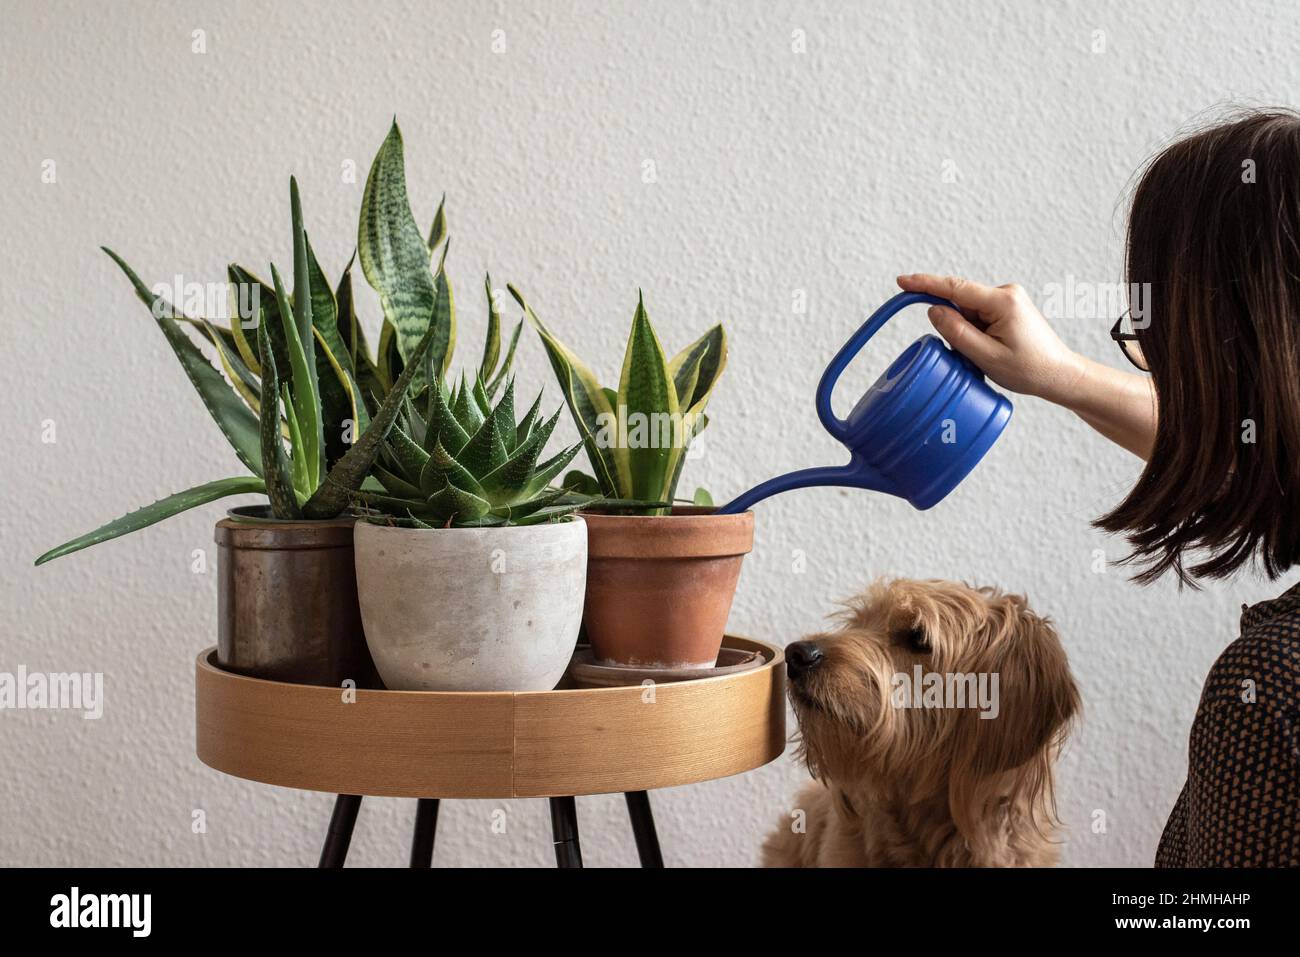 A woman is watering house plants, a dog is watching (posed scene). January 10th is Houseplant Appreciation Day. The day of honor is an invention of the US Internet community 'The Gardener's Network'. It is intended to remind people after the Christmas holidays and the hustle and bustle of New Year that they should take more care of their houseplants again. Stock Photo